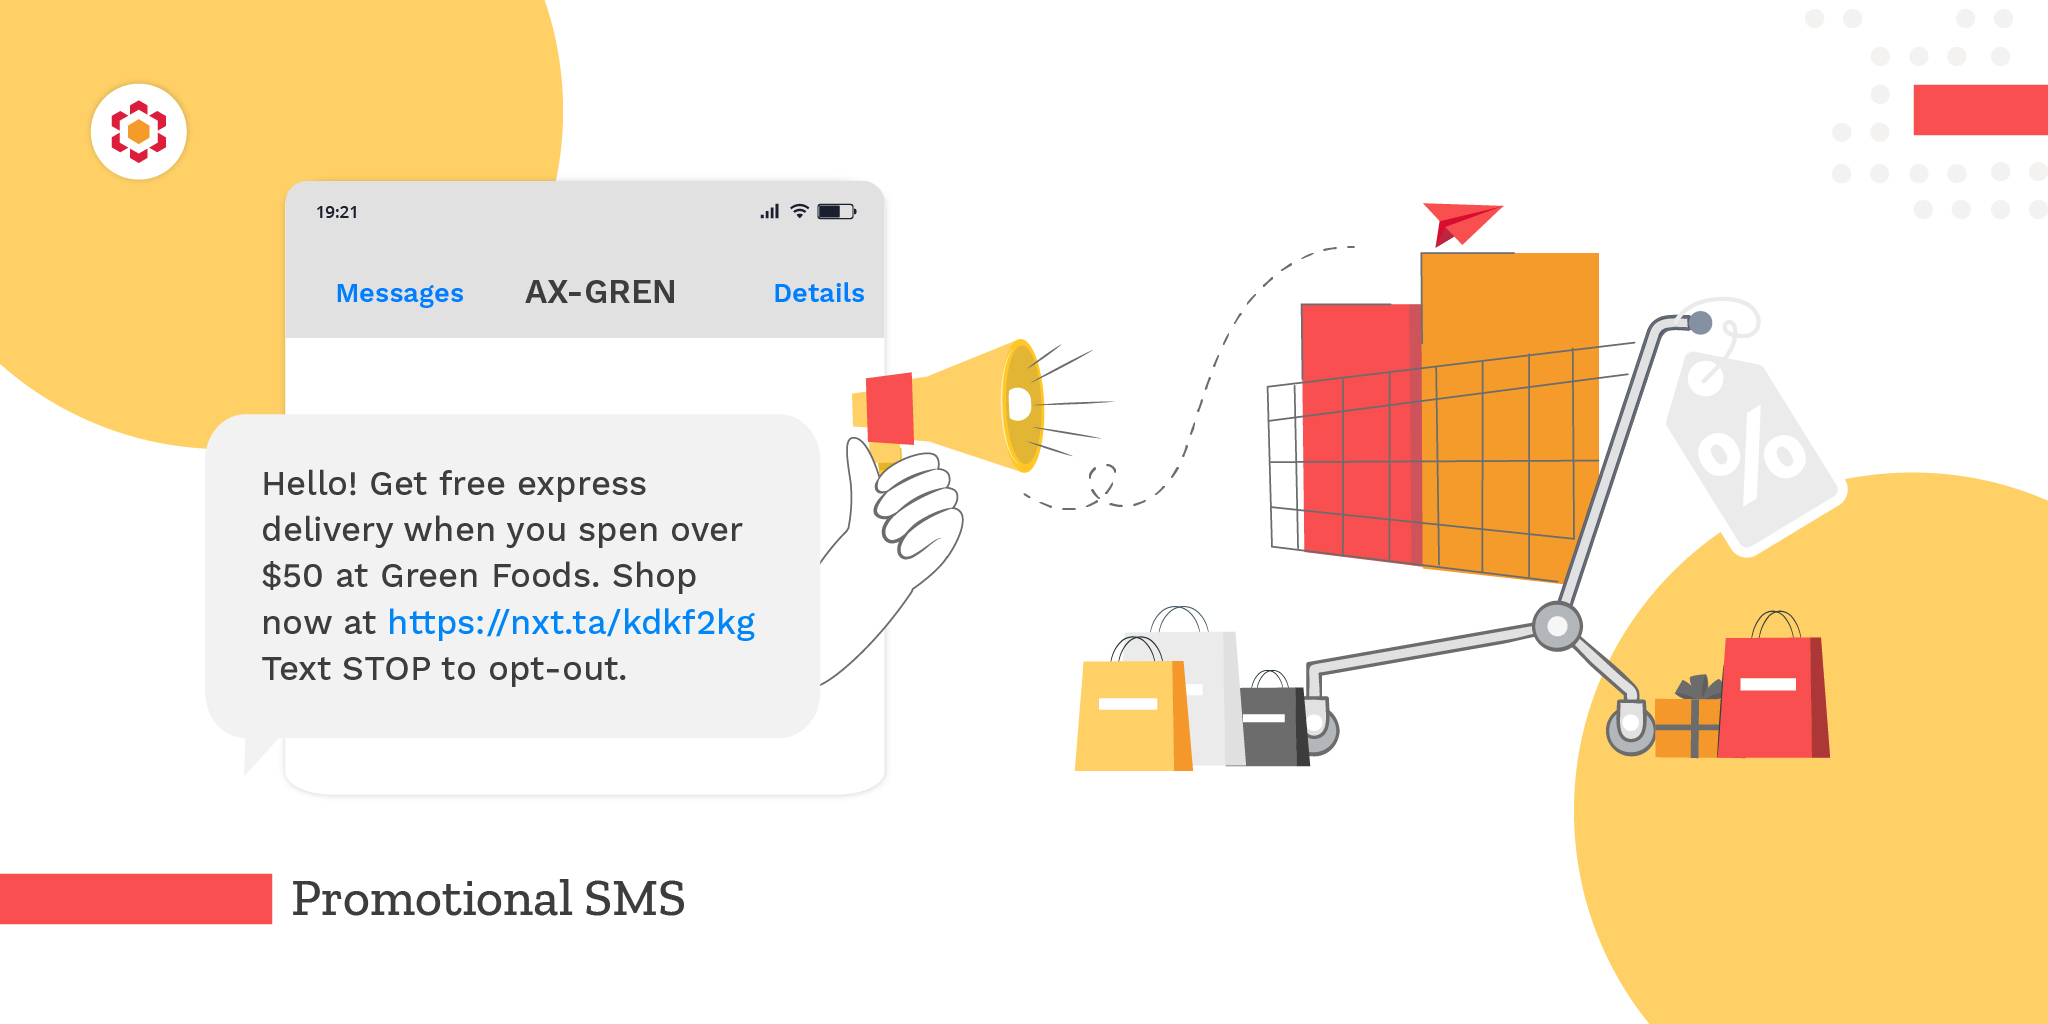 SMS mistakes to avoid